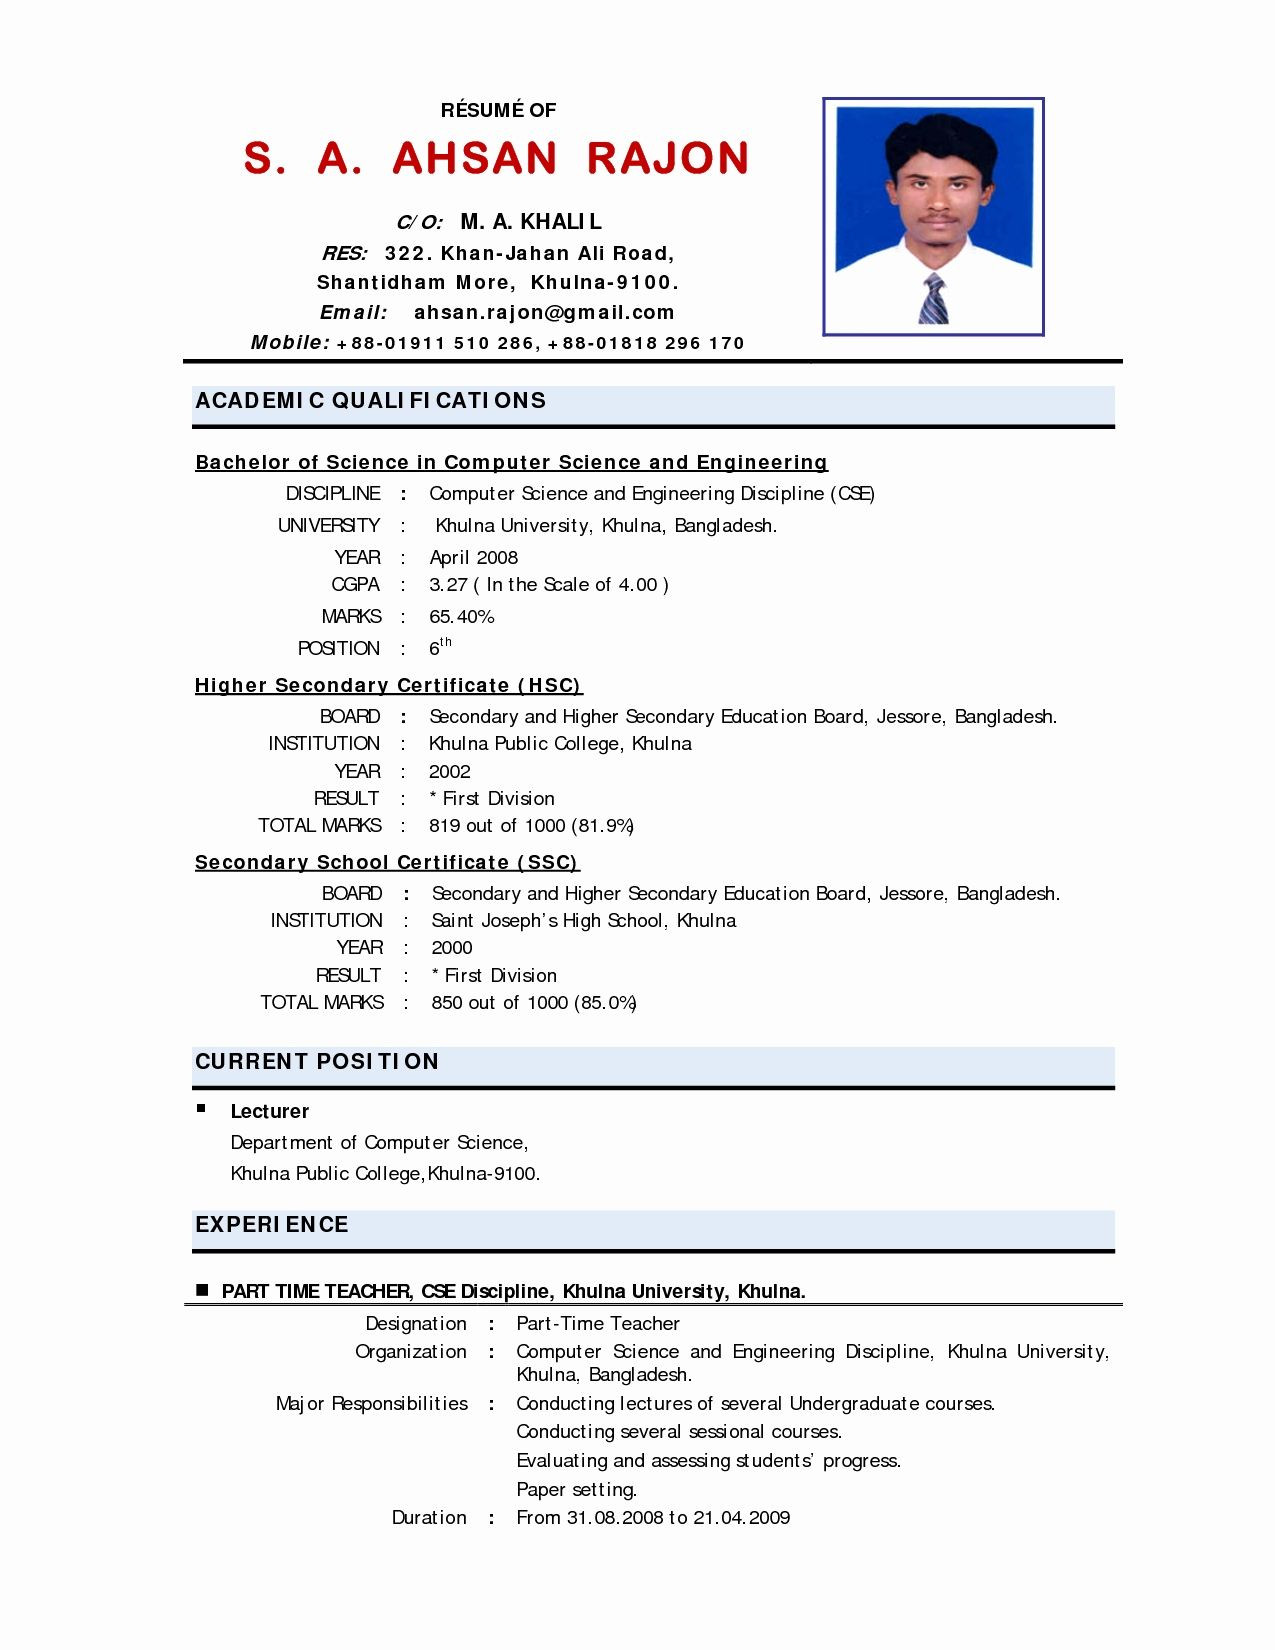 Resume Samples for College Students In India Resume format India Best Resume format, Resume format Examples …